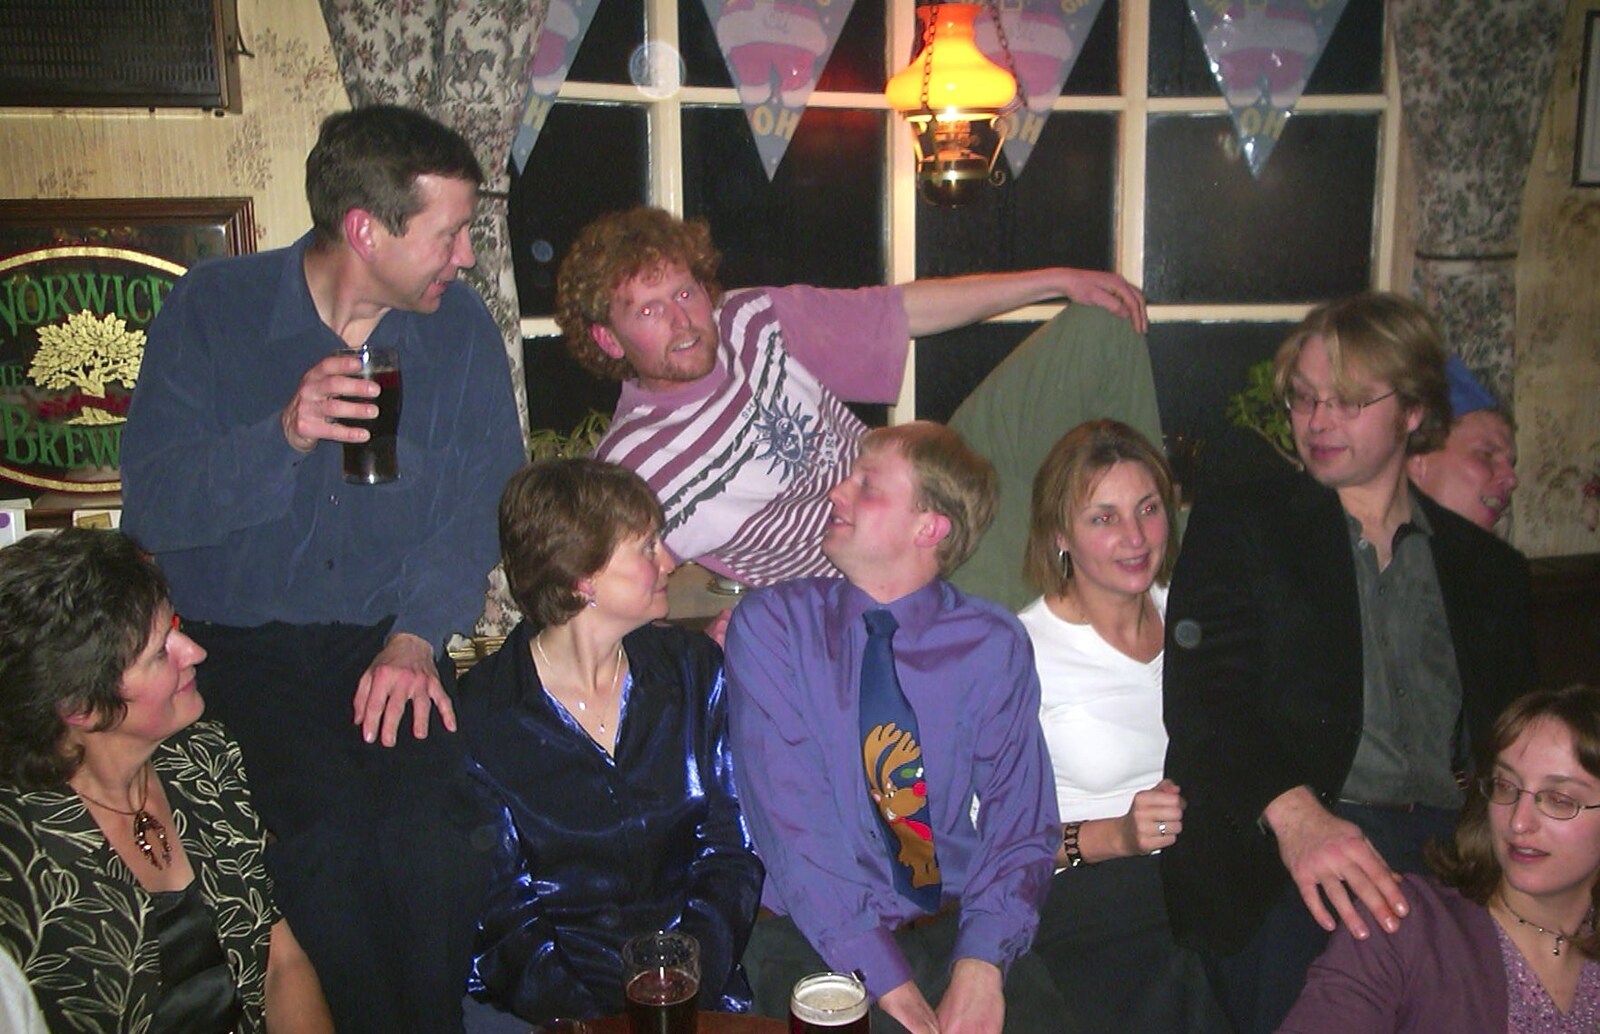 Some sort of group photo pose occurs from The BSCC Christmas Dinner, Brome Swan, Suffolk - 10th December 2002